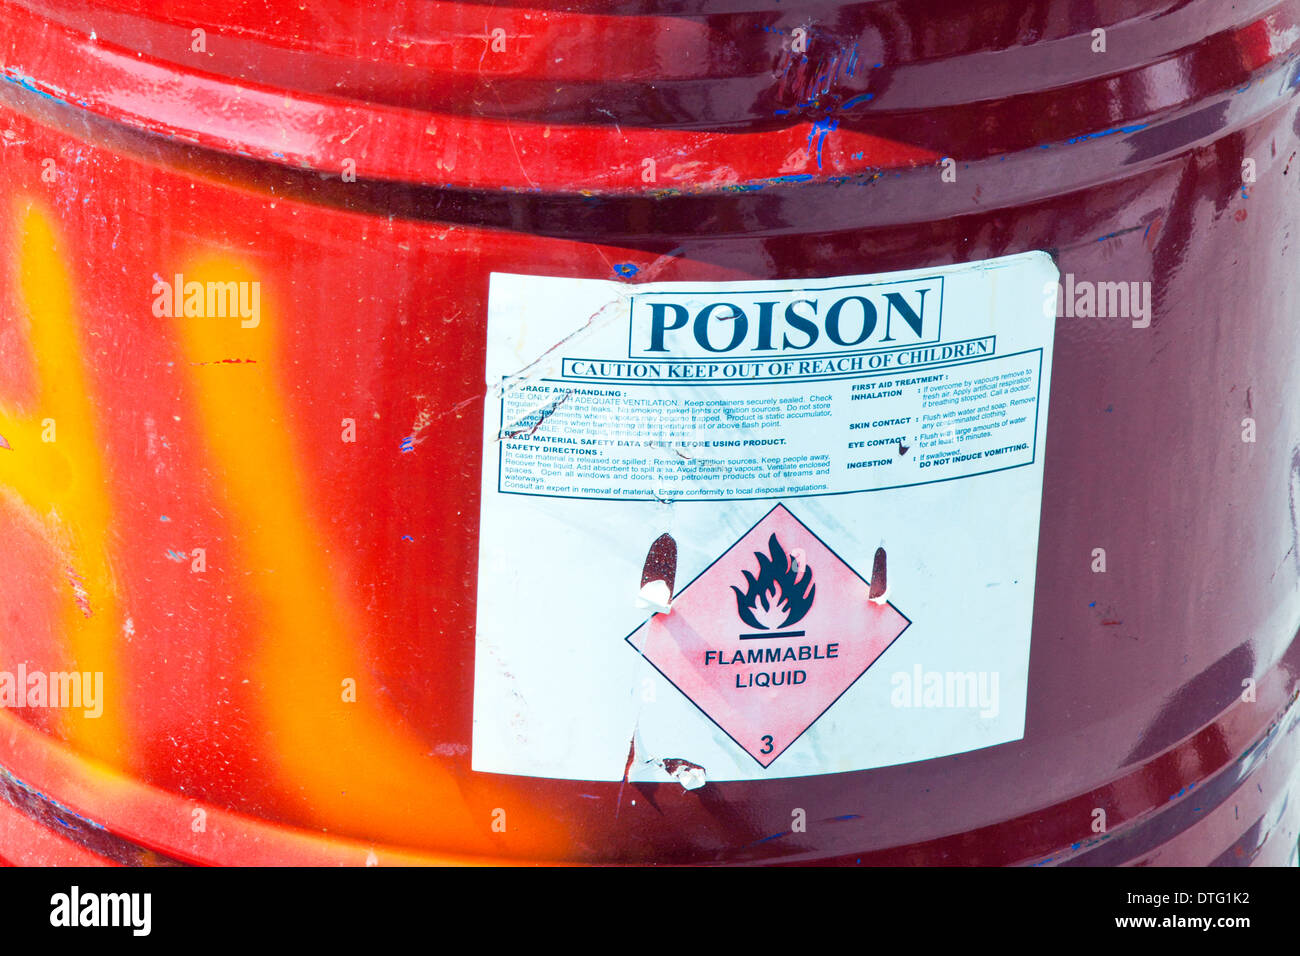 Poison barrel warning sign label flammable liquid danger red Stock Photo